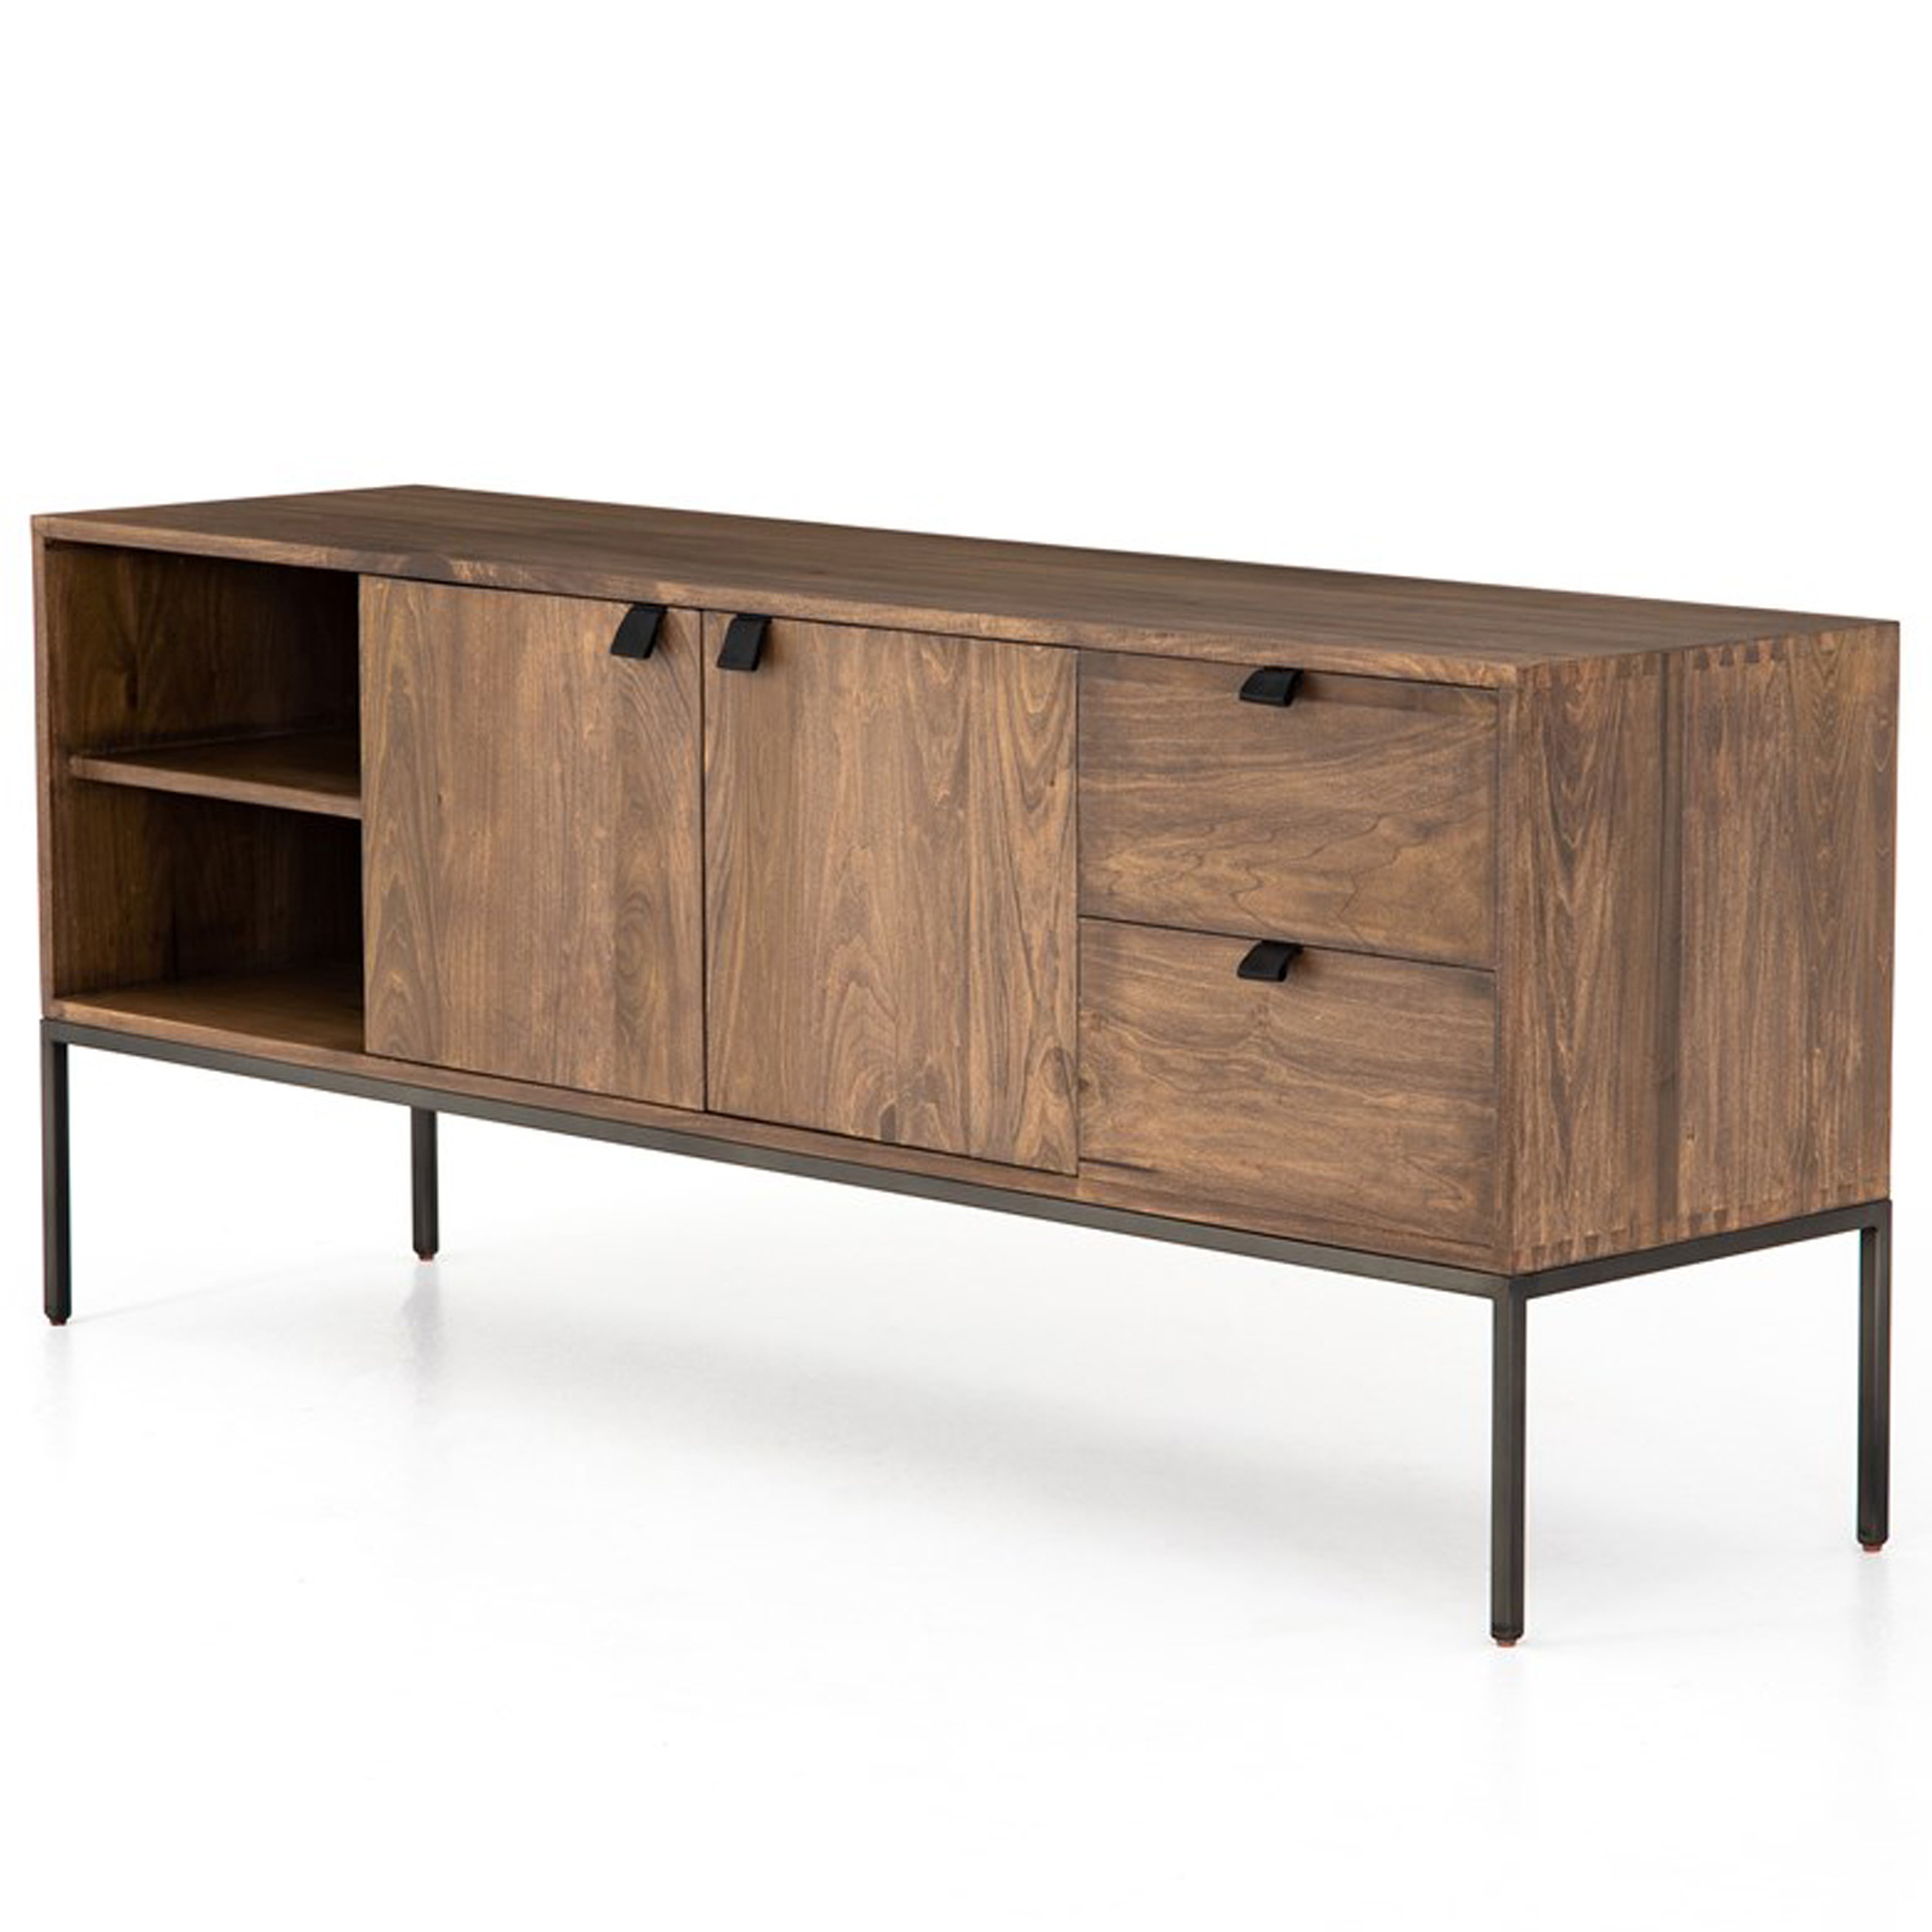 Theodore Industrial Loft Brown Wood Iron Media Cabinet - Kathy Kuo Home